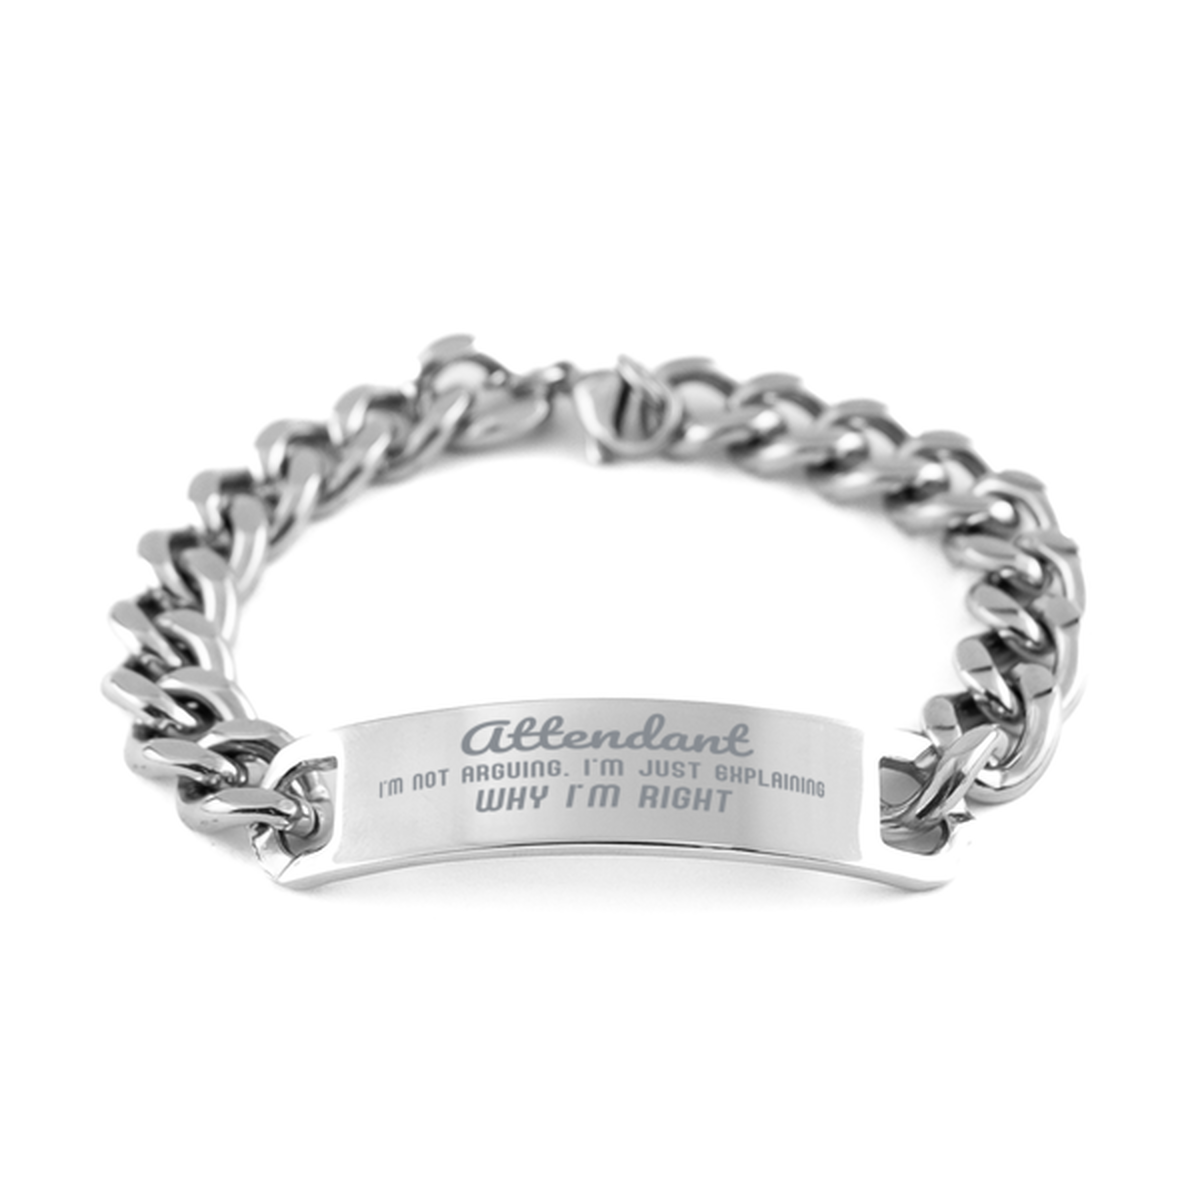 Attendant I'm not Arguing. I'm Just Explaining Why I'm RIGHT Cuban Chain Stainless Steel Bracelet, Graduation Birthday Christmas Attendant Gifts For Attendant Funny Saying Quote Present for Men Women Coworker